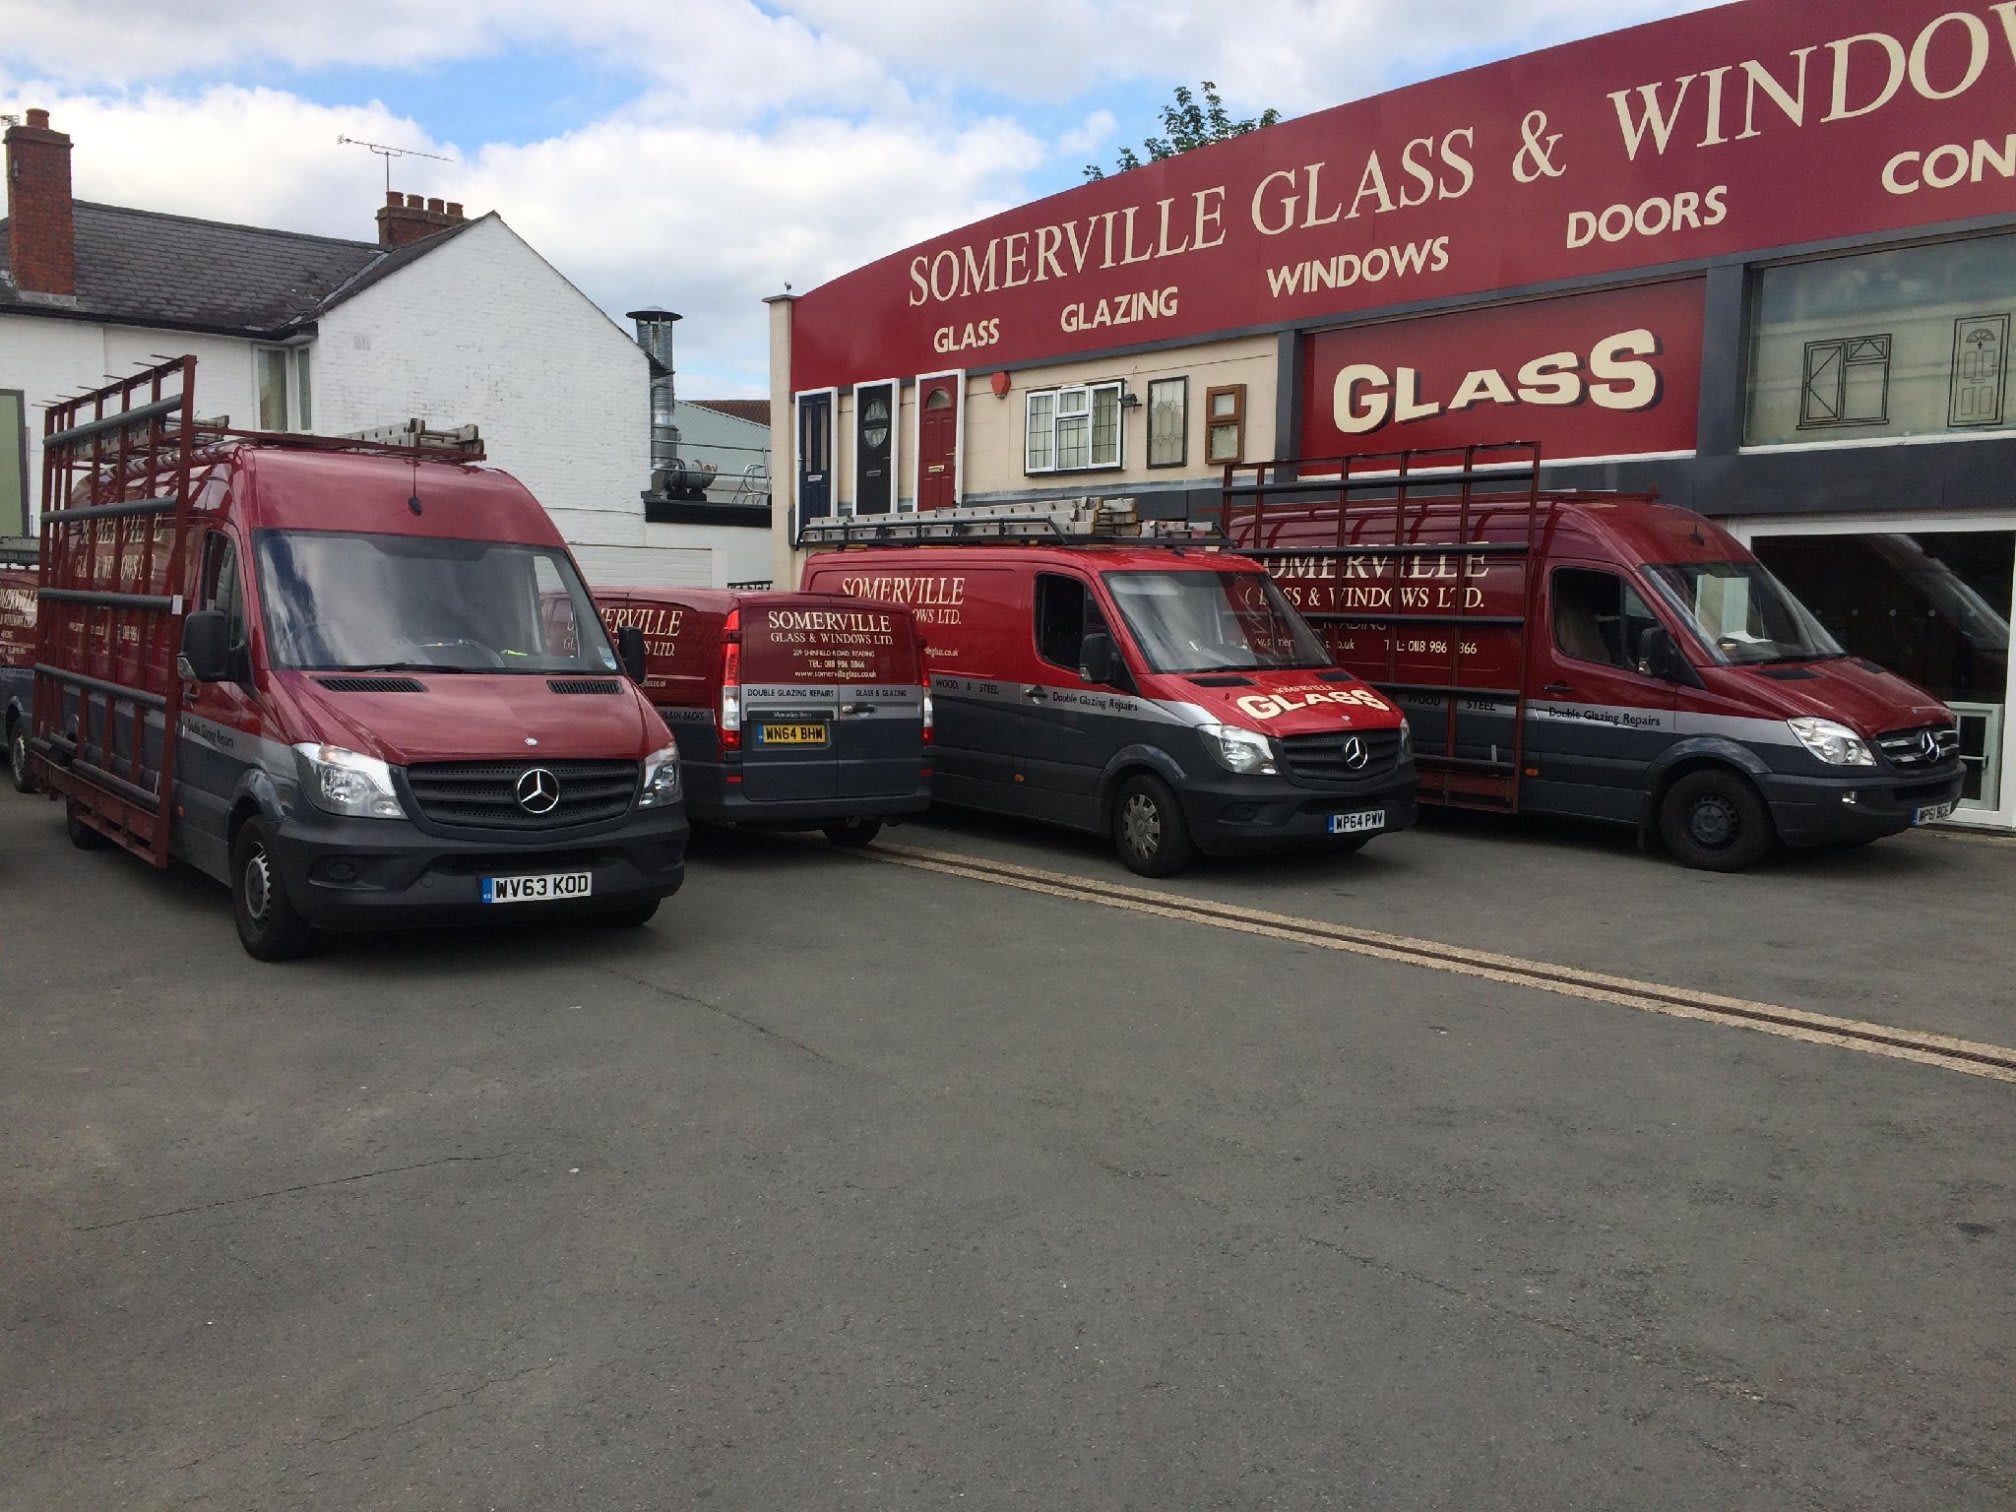 Images Somerville Glass and Windows Ltd